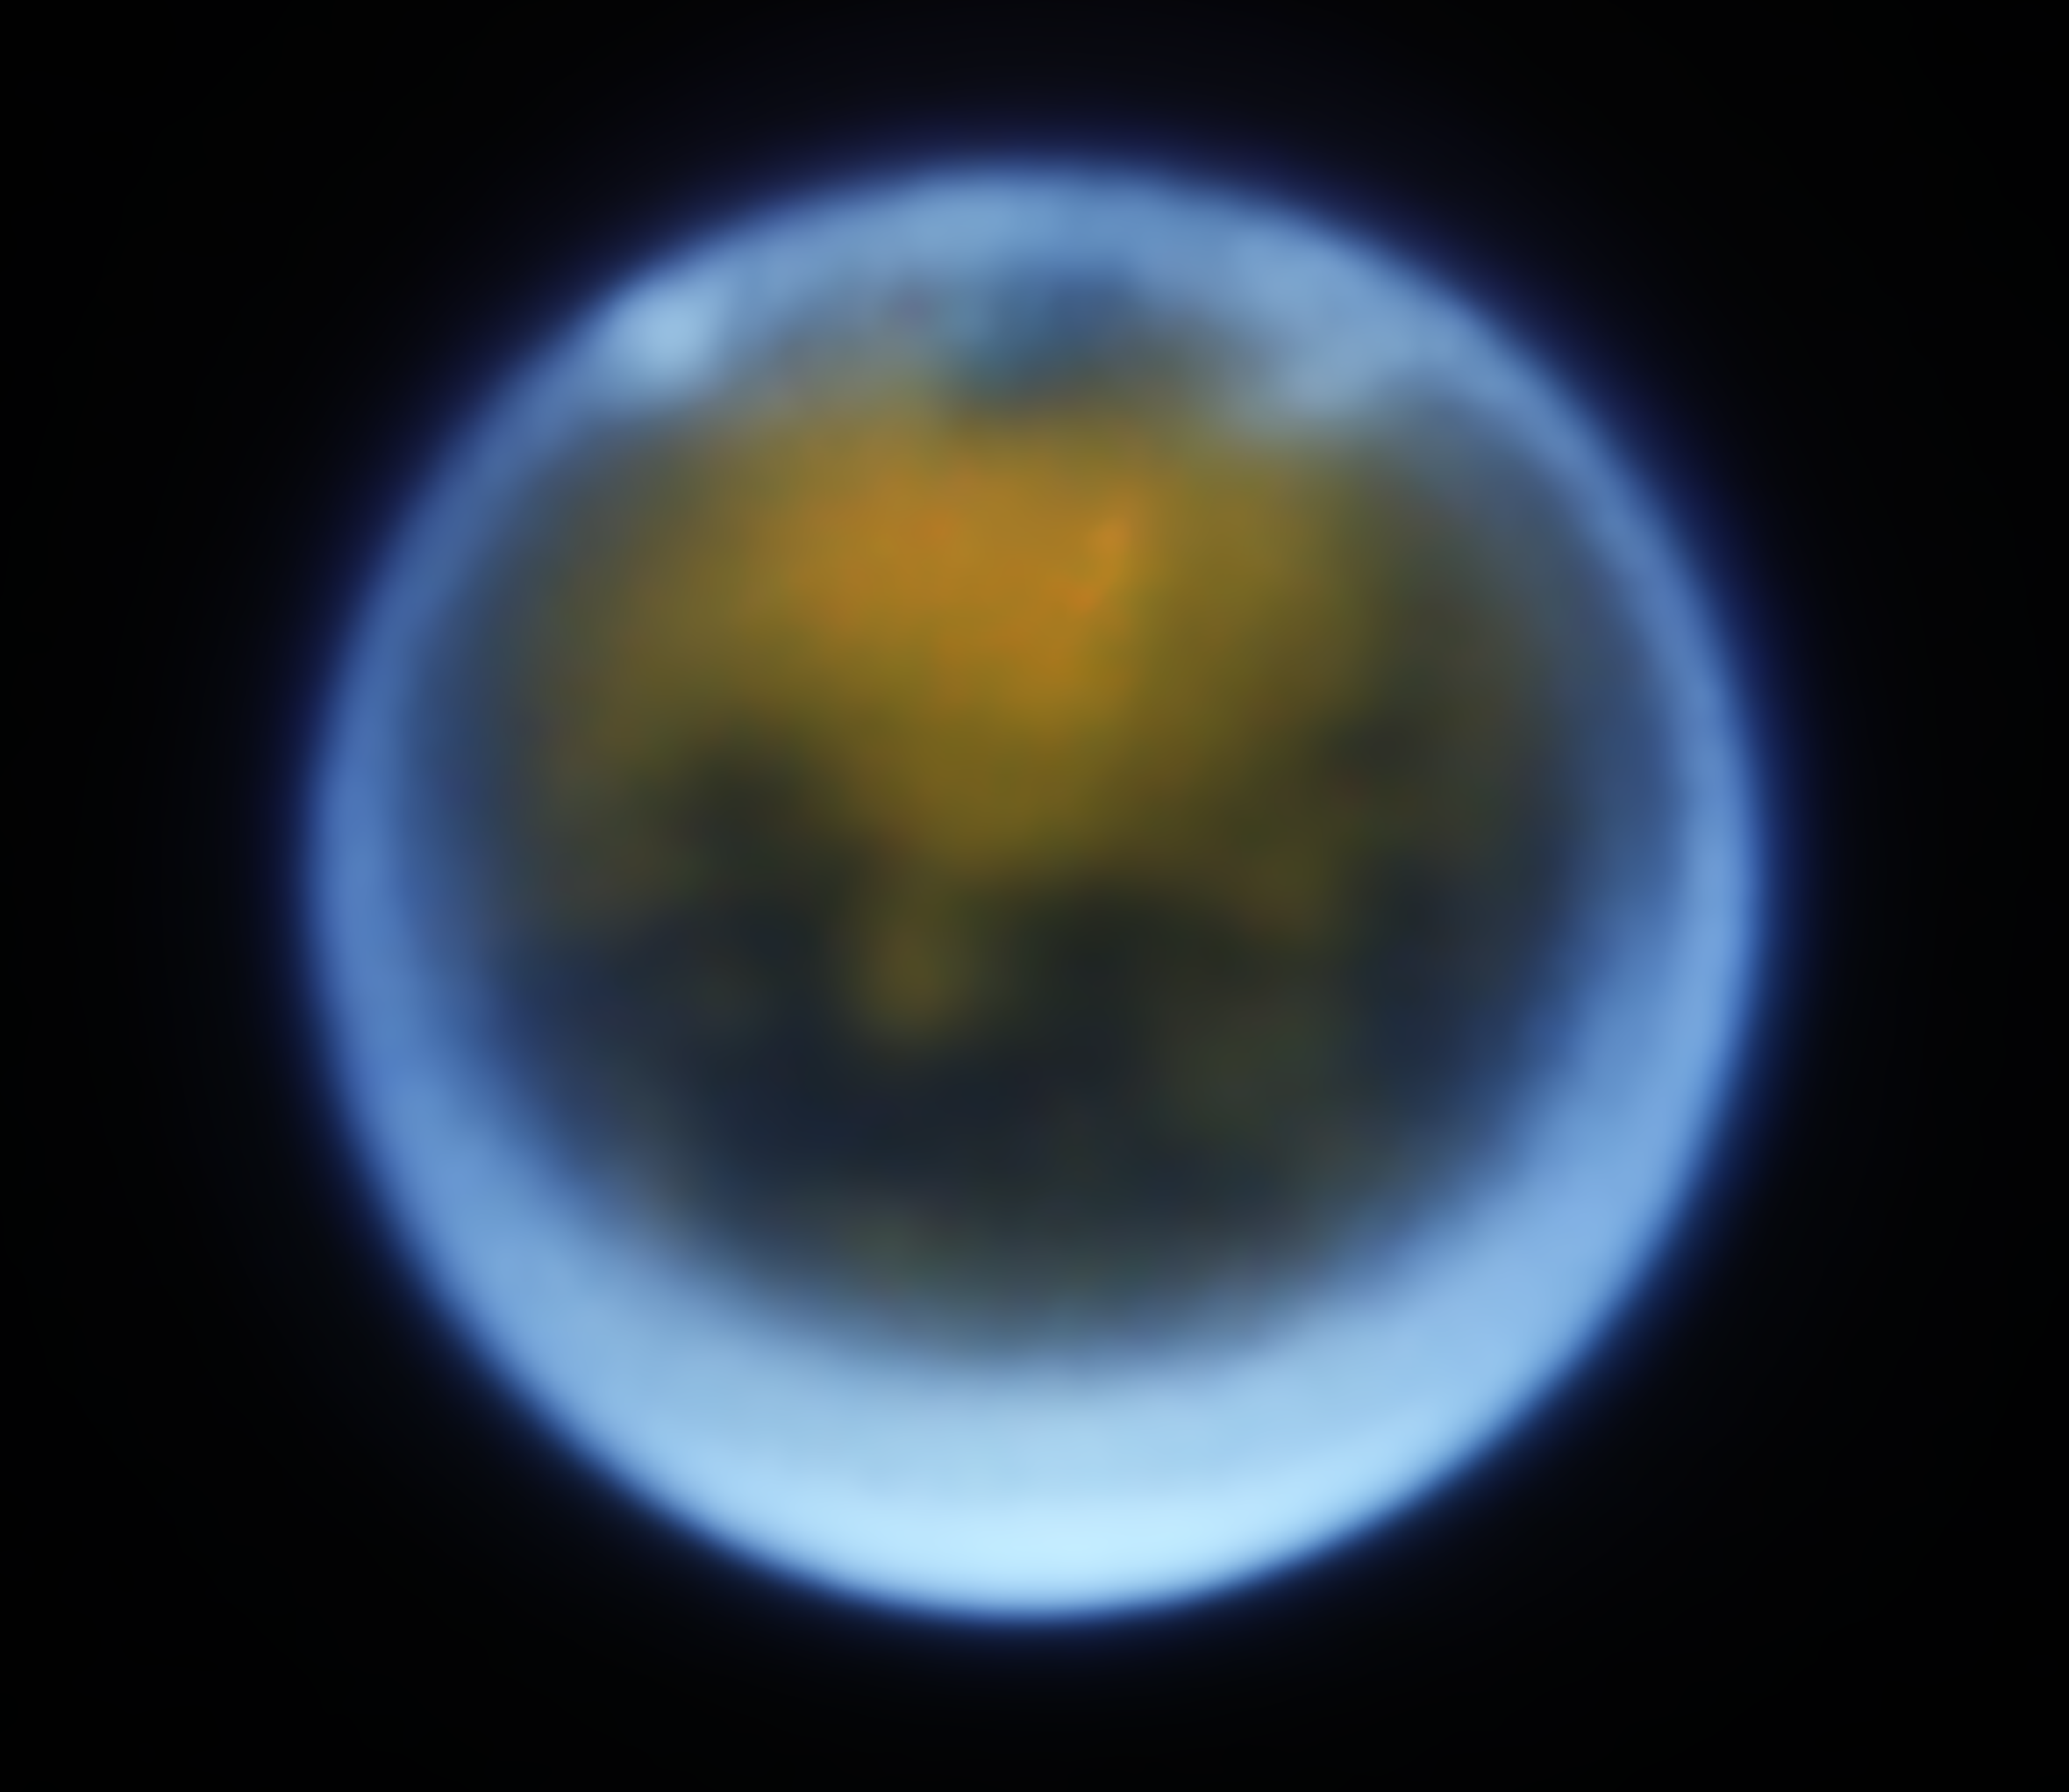 NASA Releases New JWST and W. M. Keck Observatory Images of Titan, Saturn’s Moon